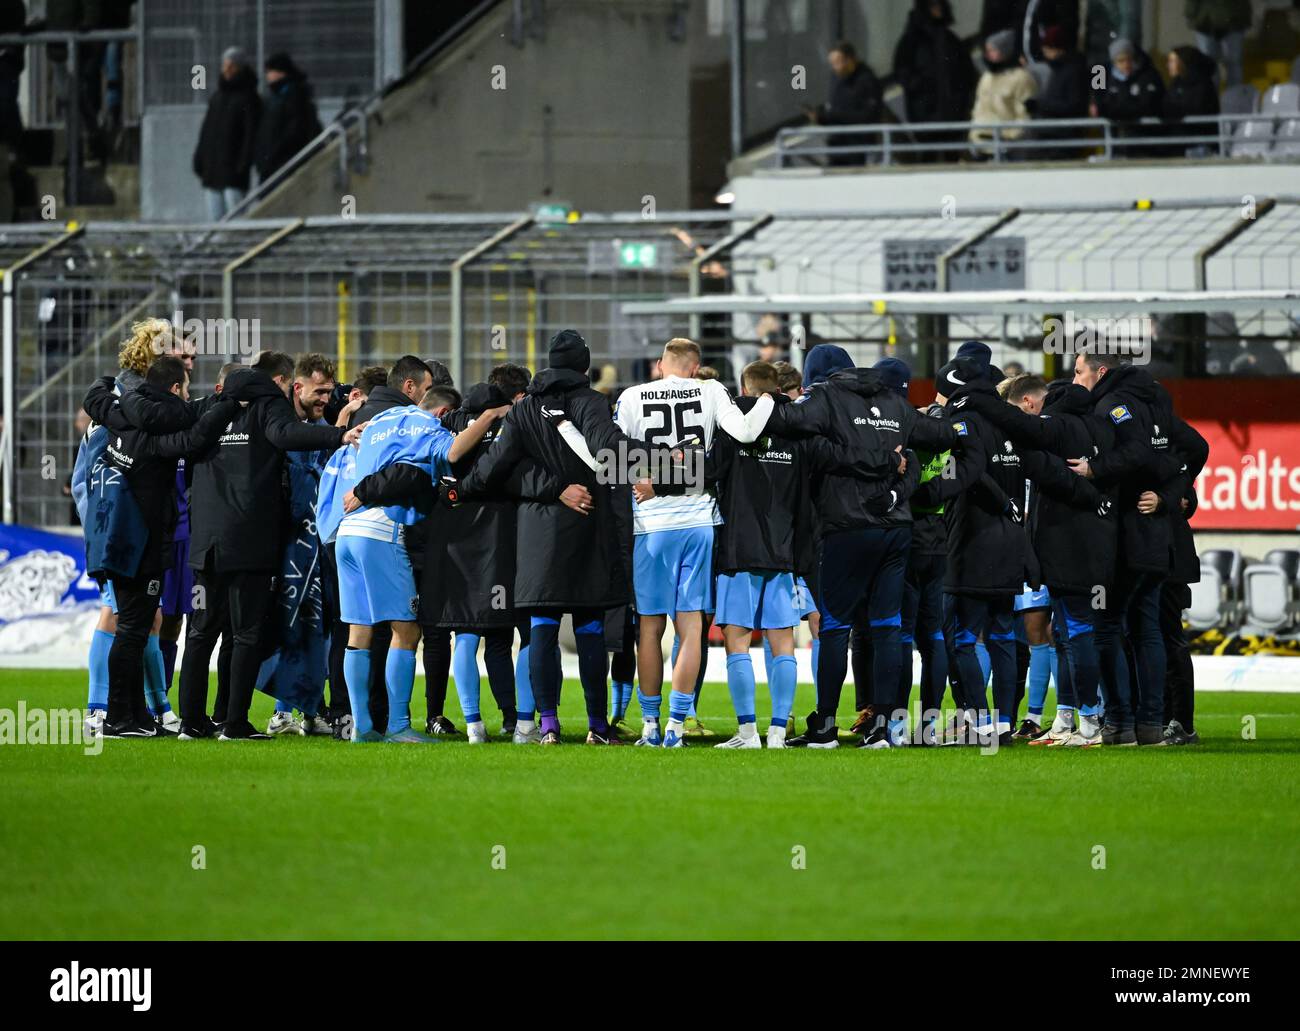 Munich, Germany. 30th Jan, 2023. Soccer: 3rd division, TSV 1860 Munich - Dynamo  Dresden, Matchday 20, Stadion an der Grünwalder Straße. Dresden players  cheer with the fans after the game. Credit: Sven